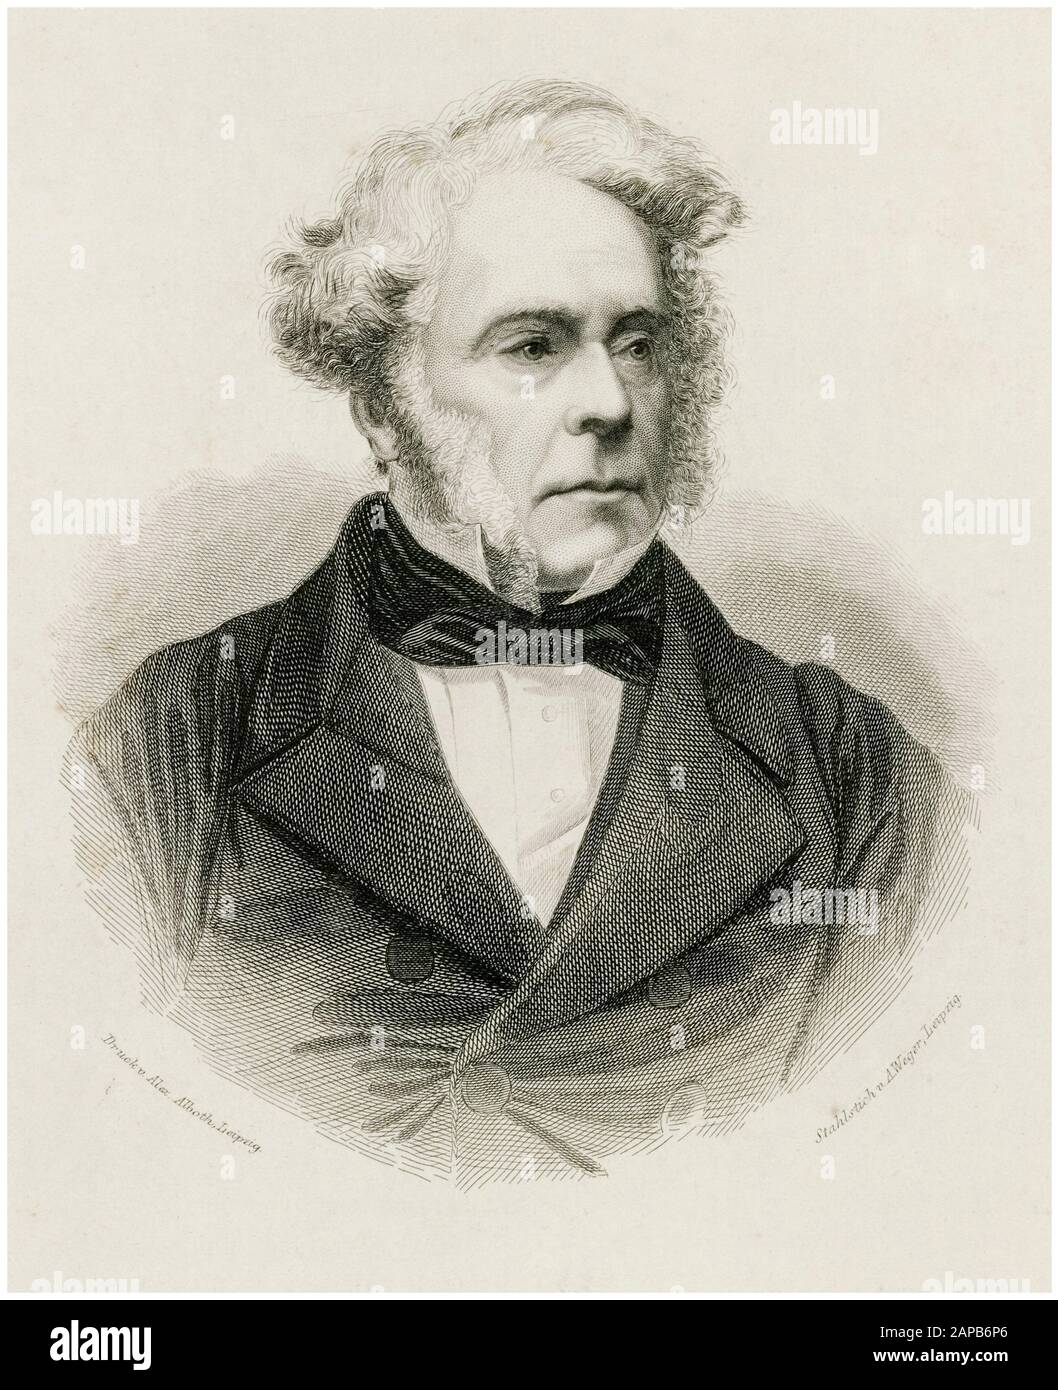 Lord Palmerston, Henry John Temple, 3rd Viscount Palmerston (1784-1865), twice British Prime Minister, portrait engraving, before 1865 Stock Photo